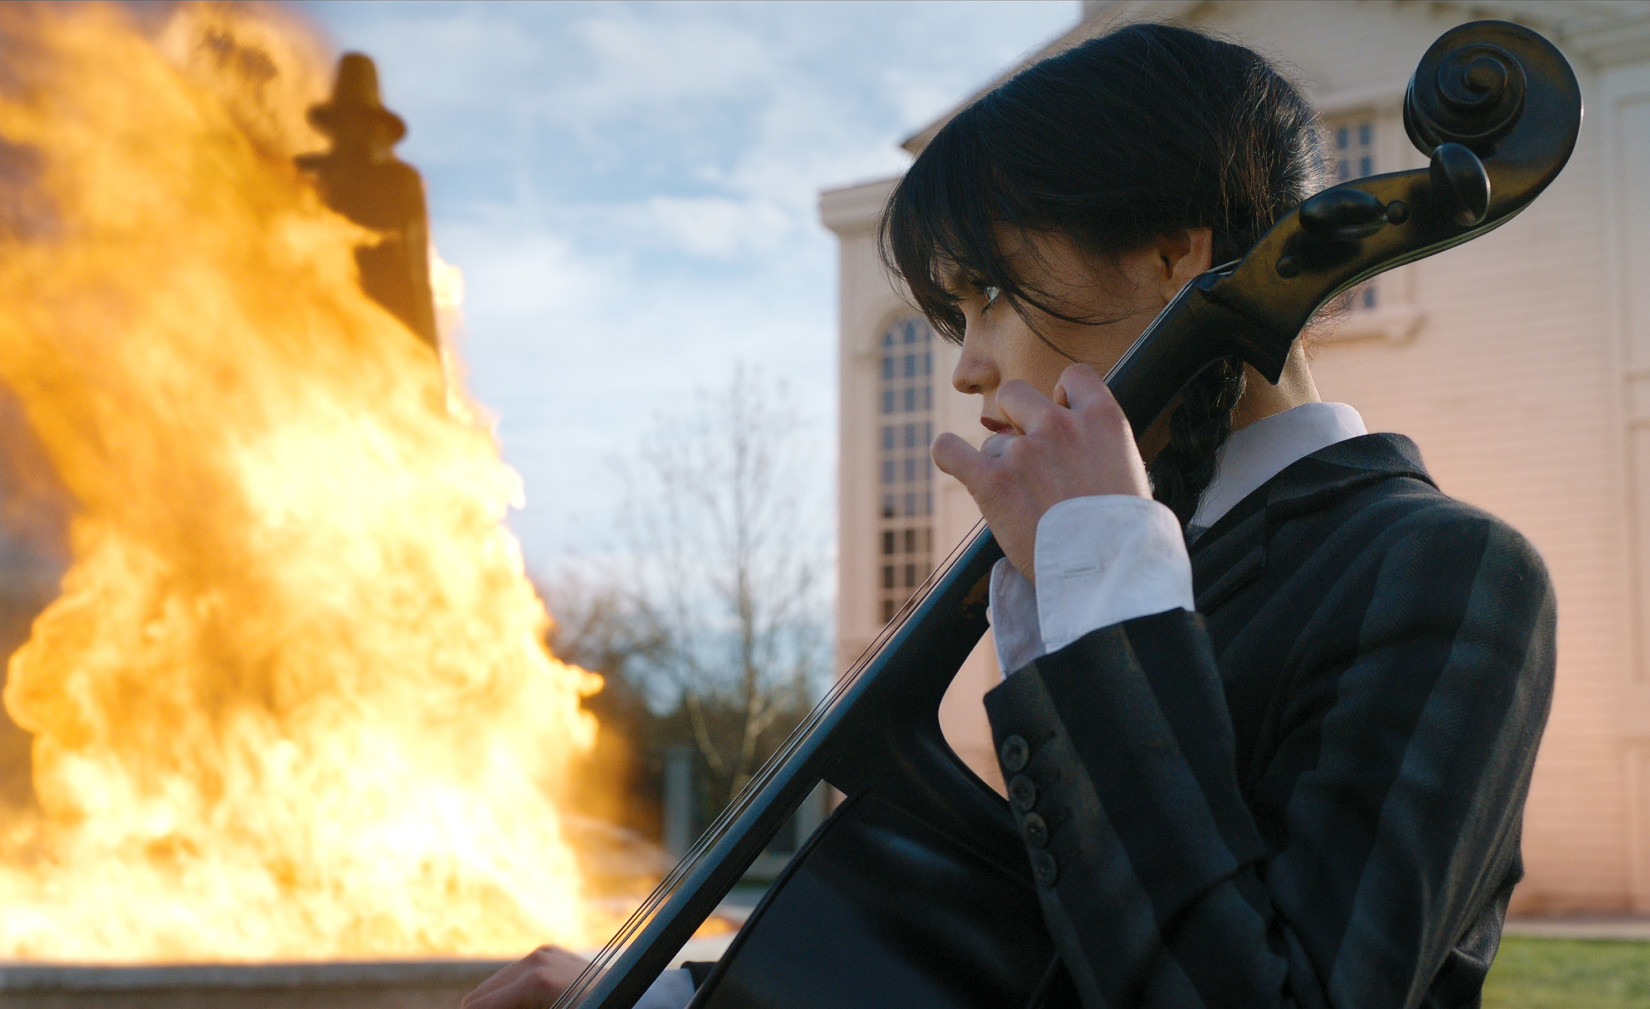 Jenna Ortega in 'Wednesday' for our article about when season 2 could premiere on Netflix. She's playing the cello and there's a fire behind her.